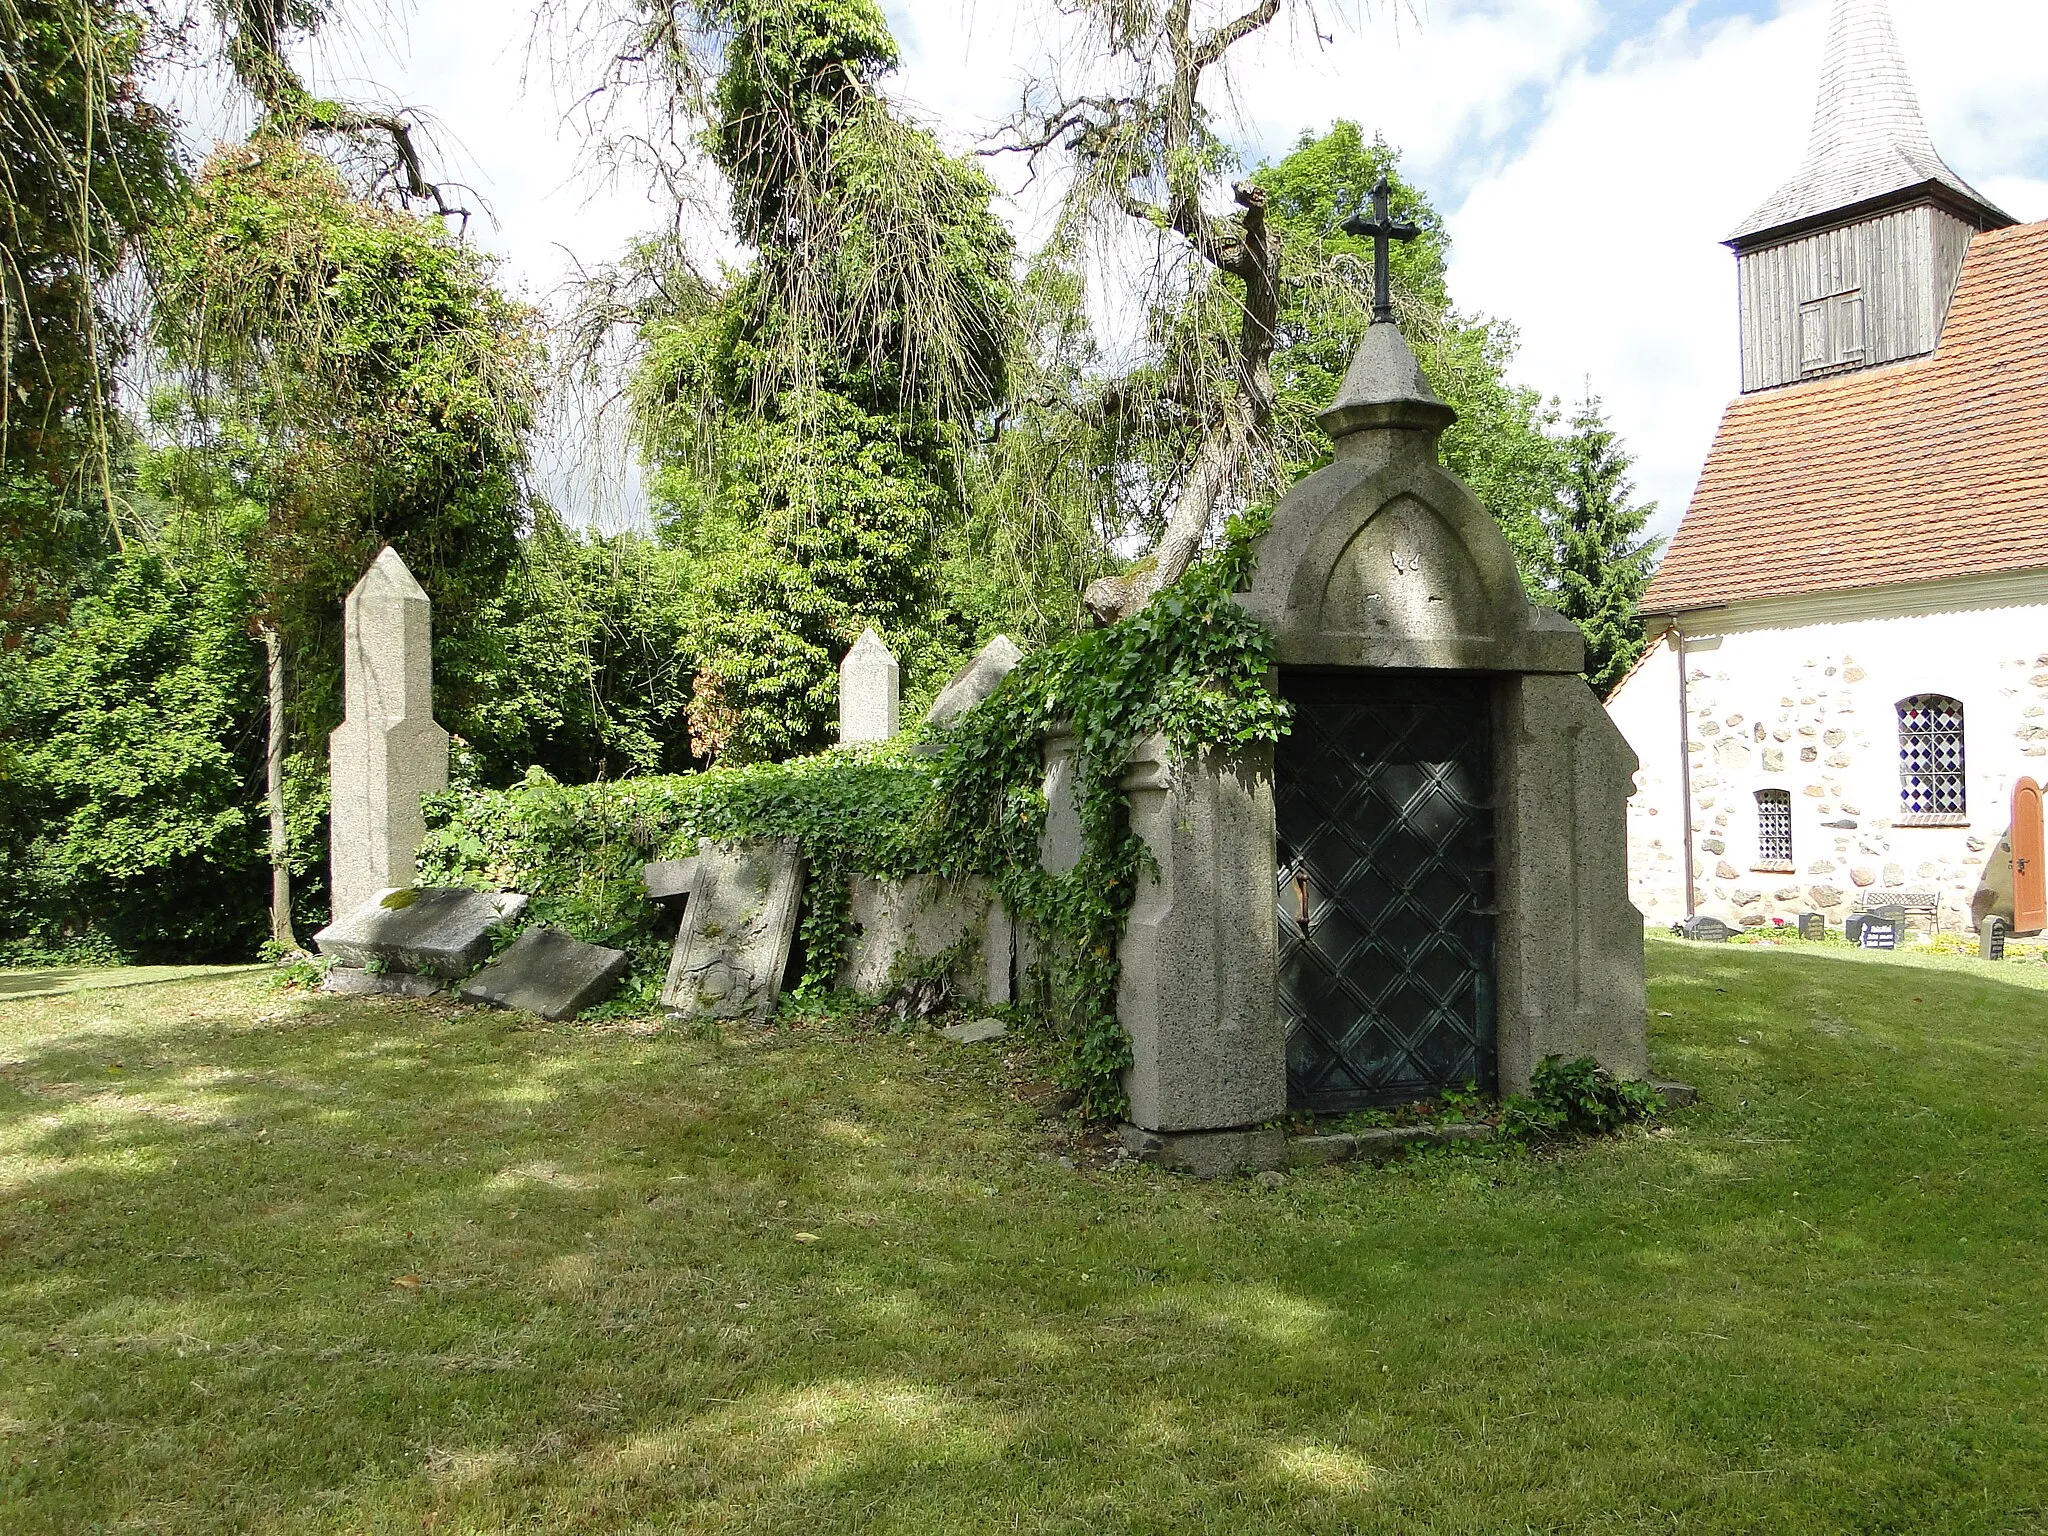 Photo showing: Burial vault of the Barner family on the church yard in Bülow, district Ludwigslust-Parchim, Mecklenburg-Vorpommern, Germany